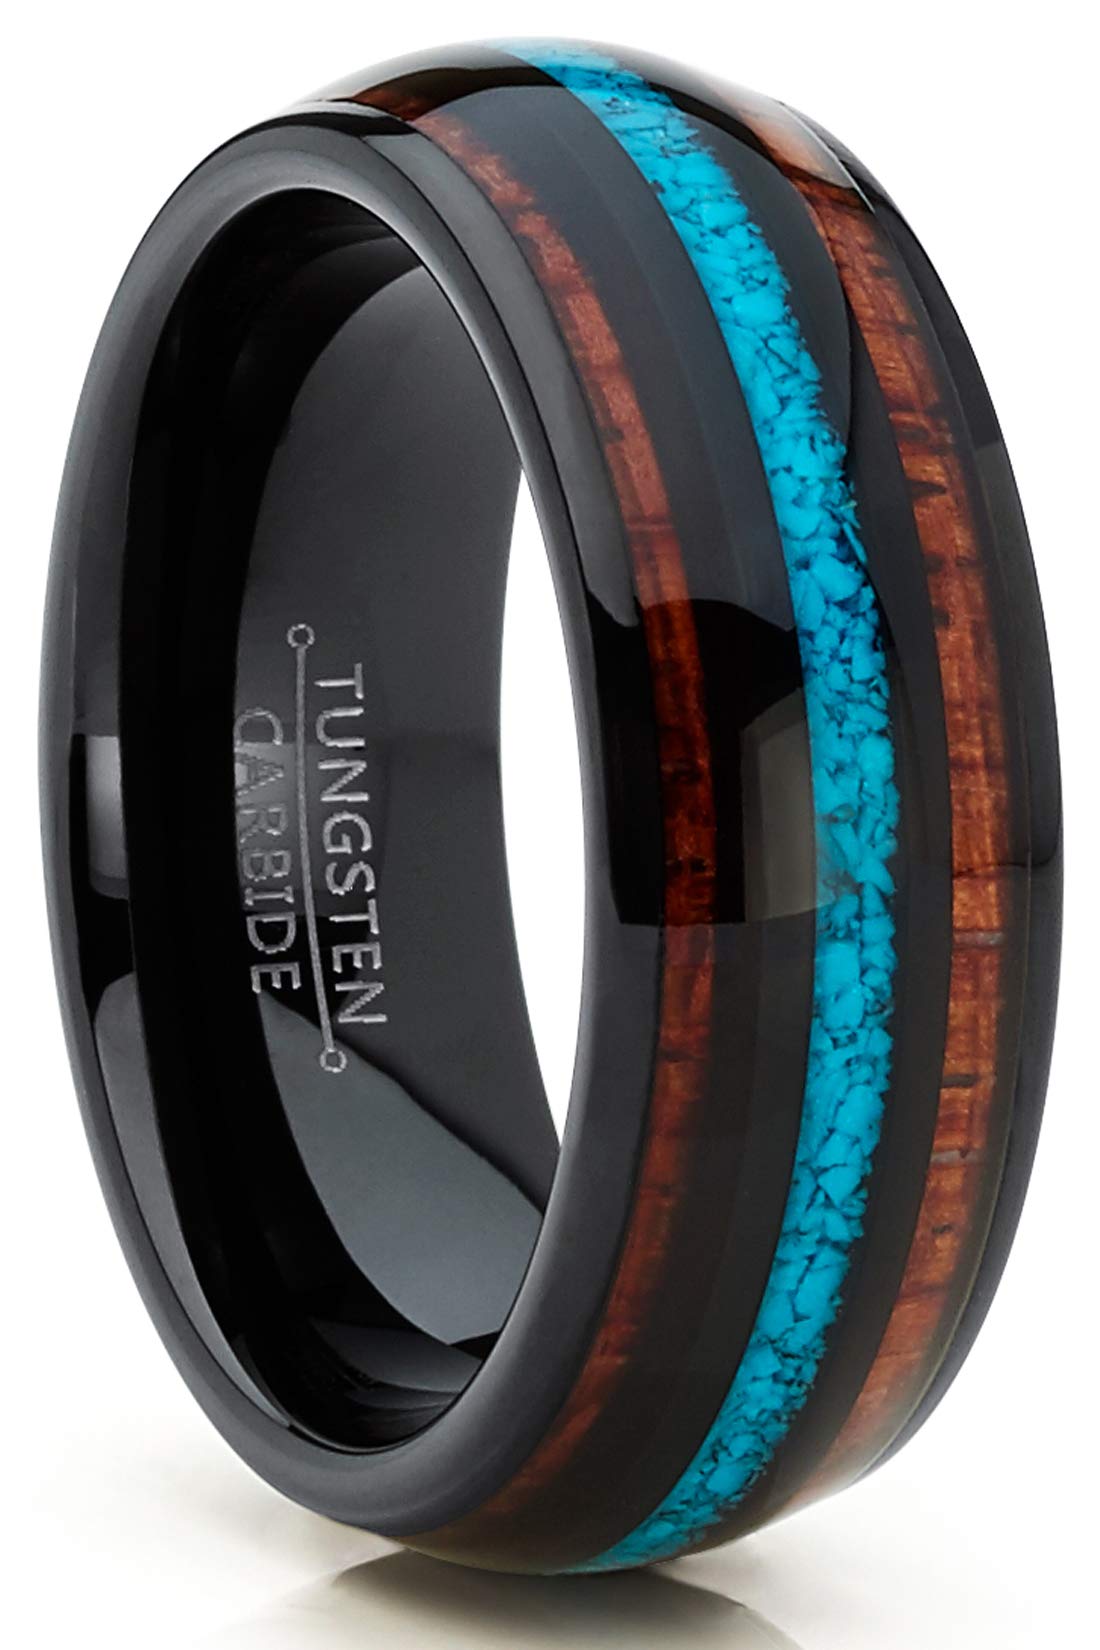 Black Tungsten Carbide Koa Wood & Crushed Turquoise Inlay Men's Comfort Fit Wedding Band Engagement Ring - Size 15 8MM